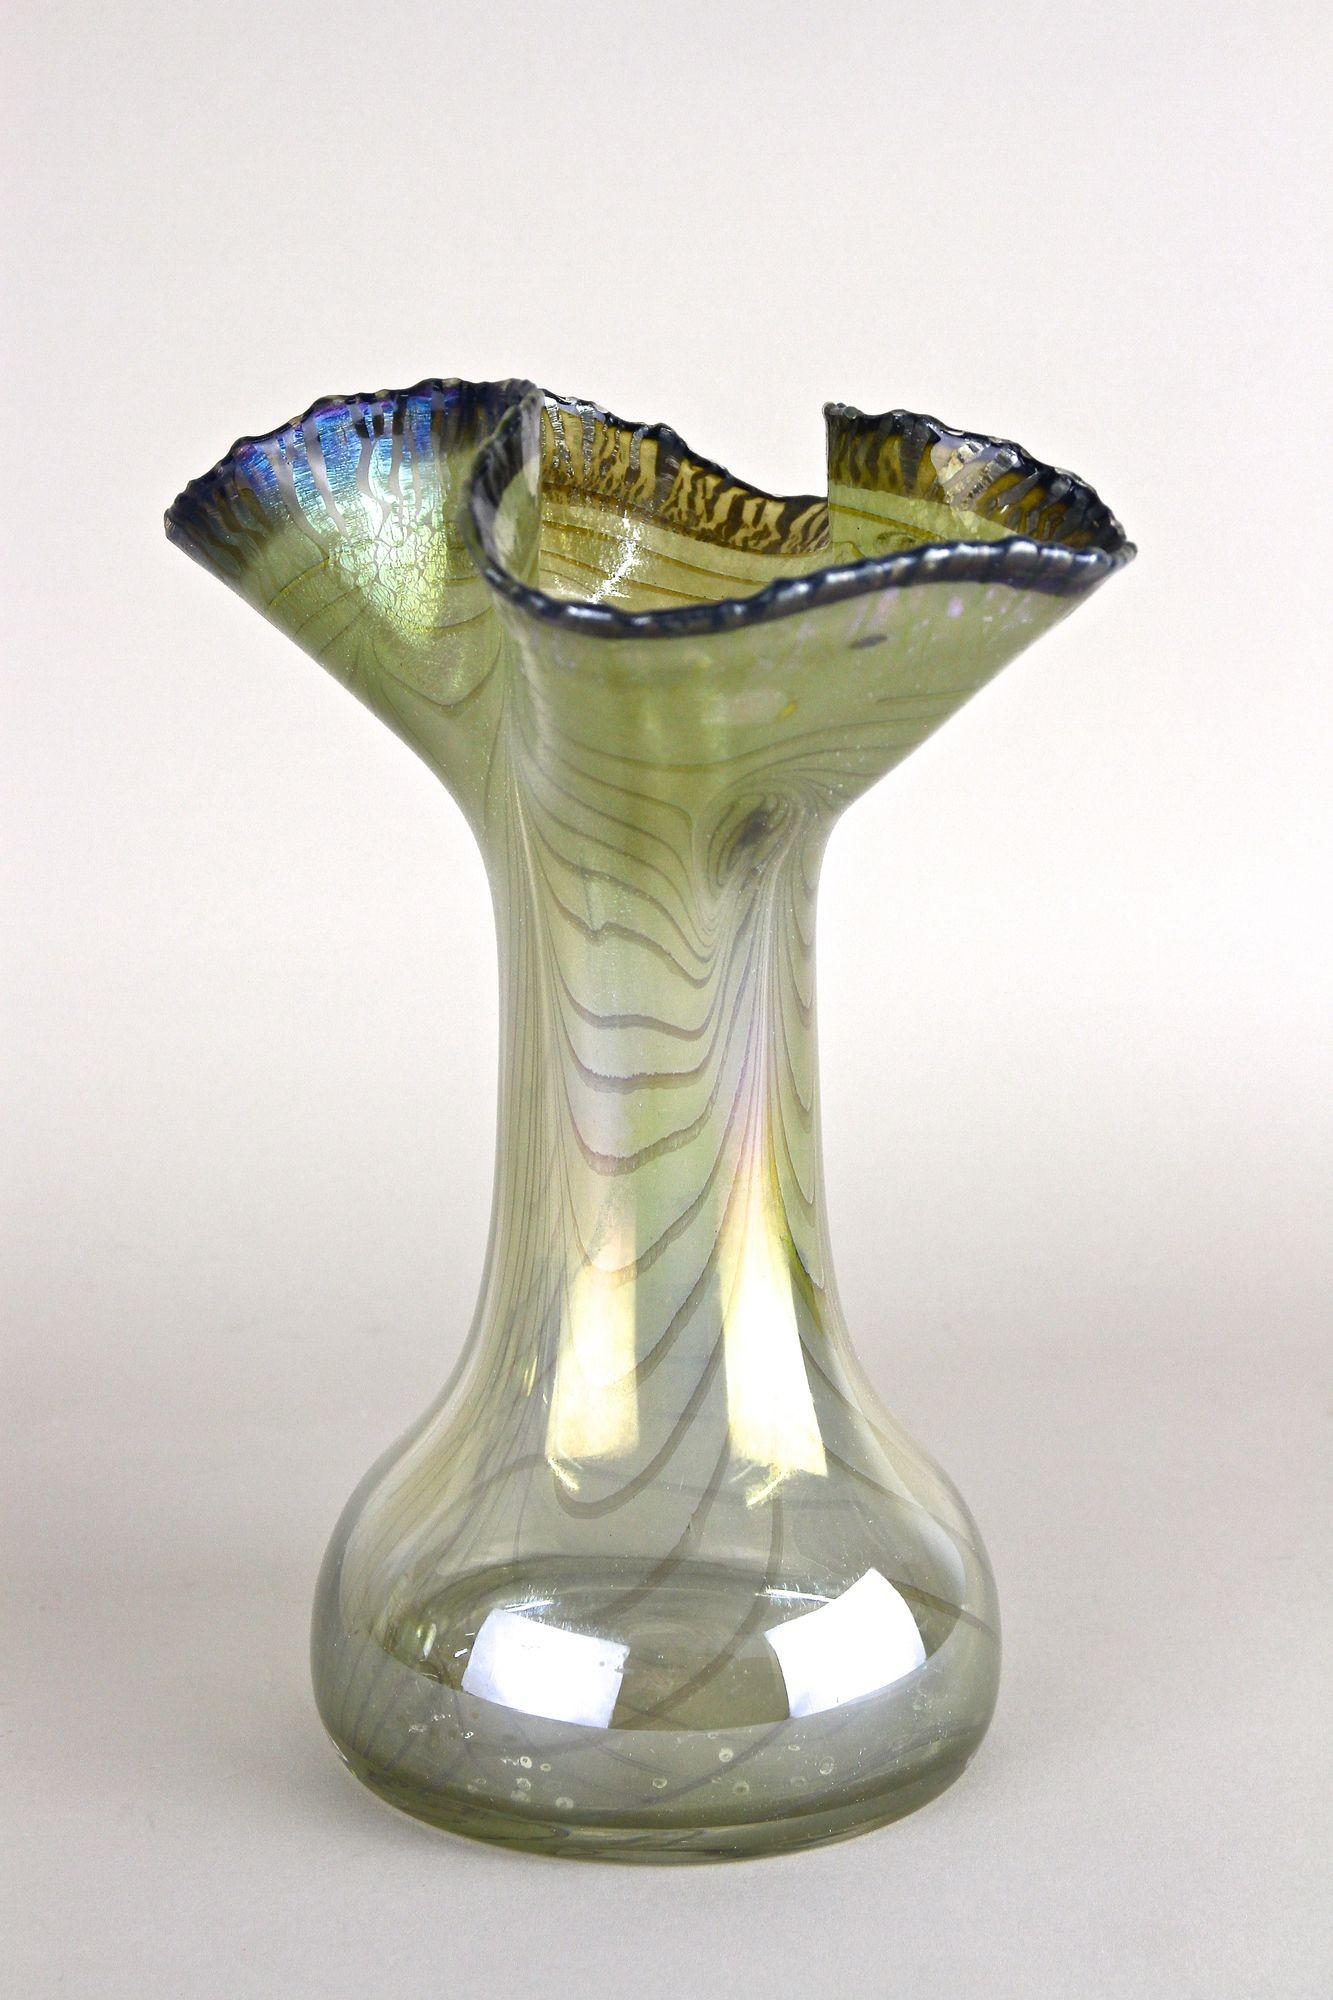 Blown Glass 20th Century Iridescent Glass Vase by E. Eisch - Signed, Germany 1982 For Sale